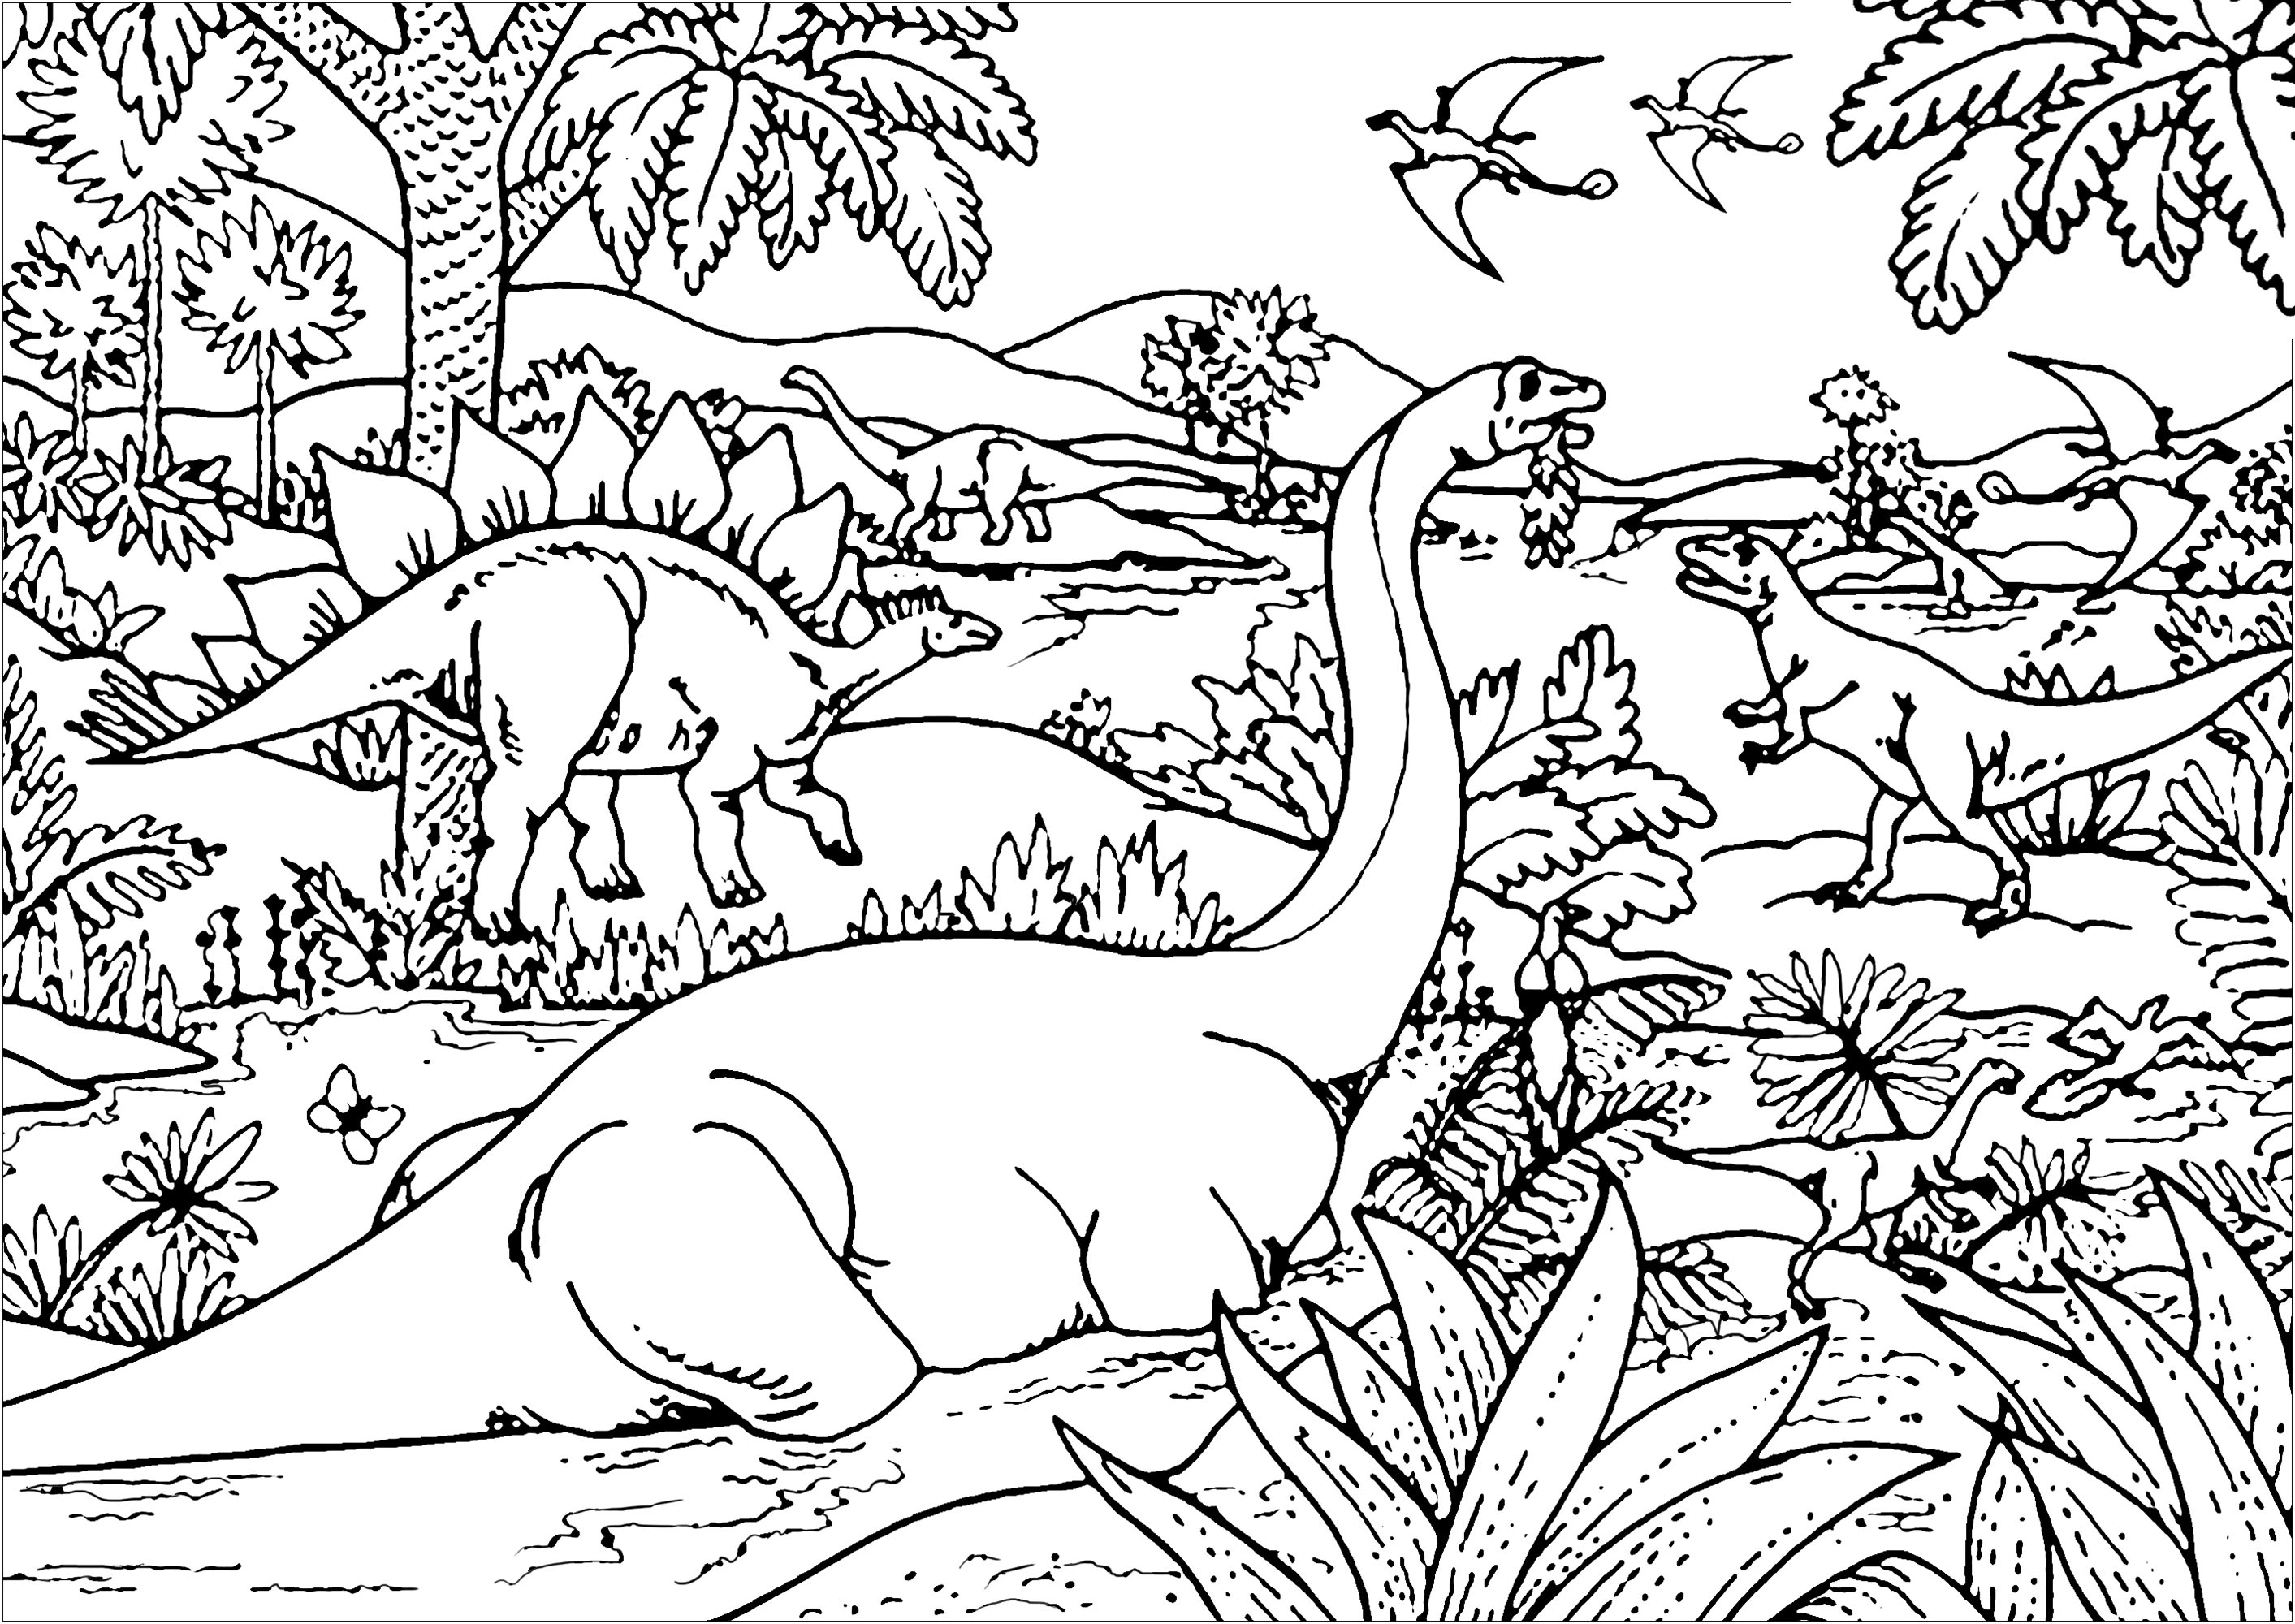 dinosaurs-in-a-plain-dinosaurs-adult-coloring-pages